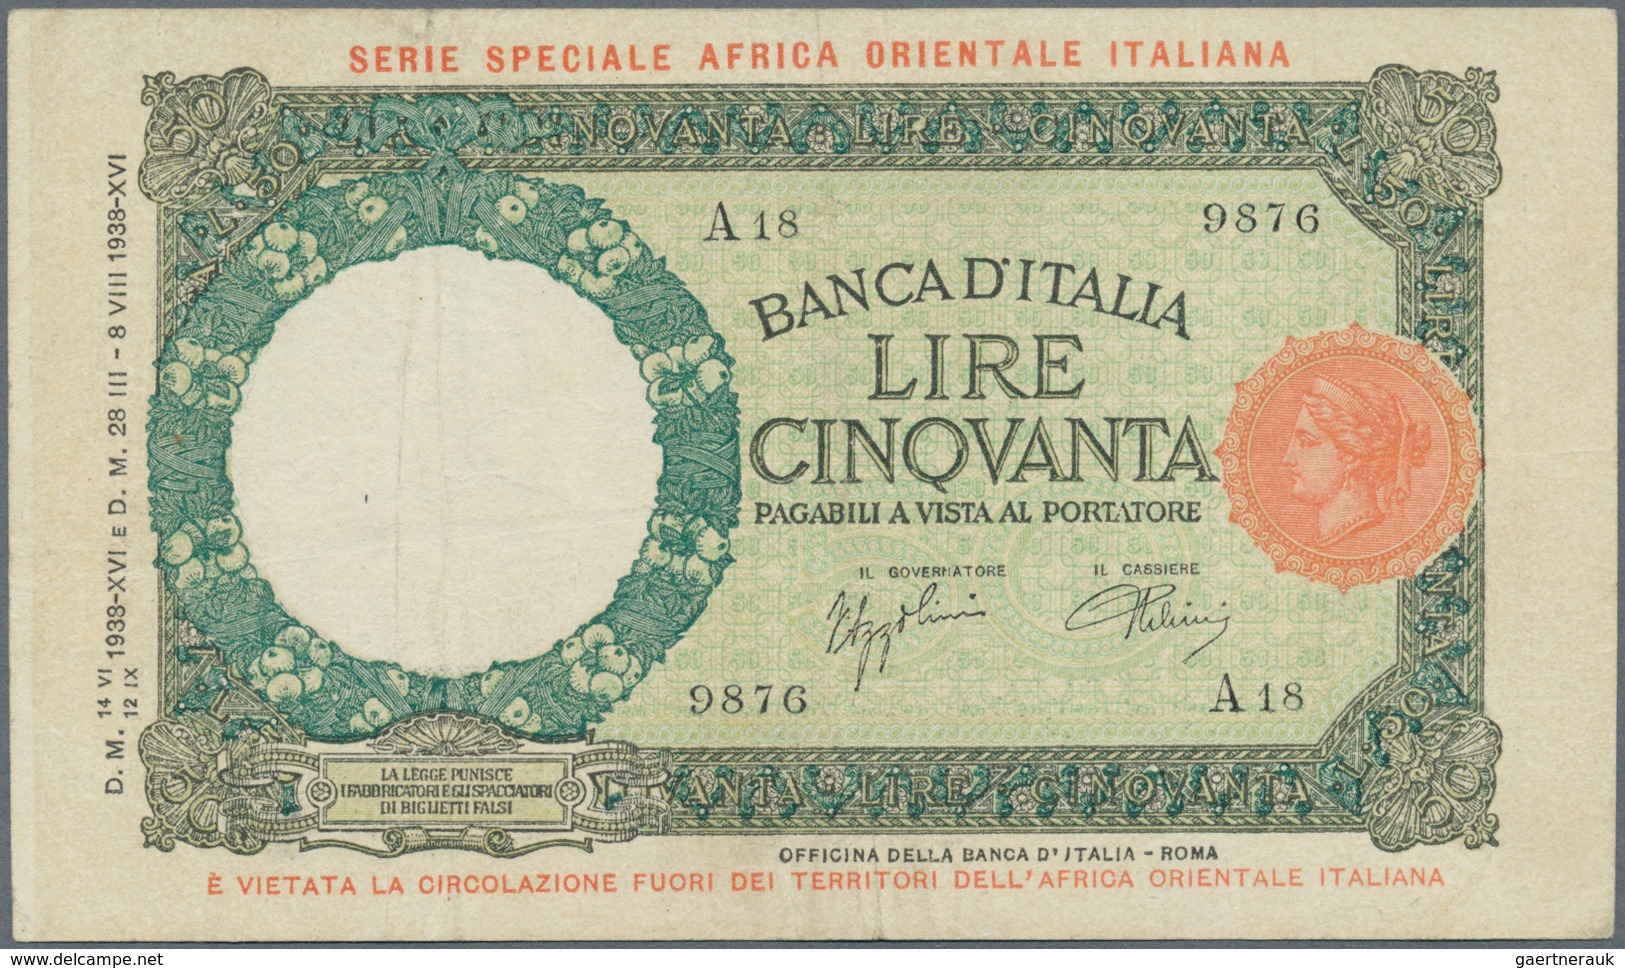 Italian East Africa / Italienisch Ost-Afrika: 50 Lire 1938 P. 1, Used With Folds, Pressed But Strong - Italiaans Oost-Afrika